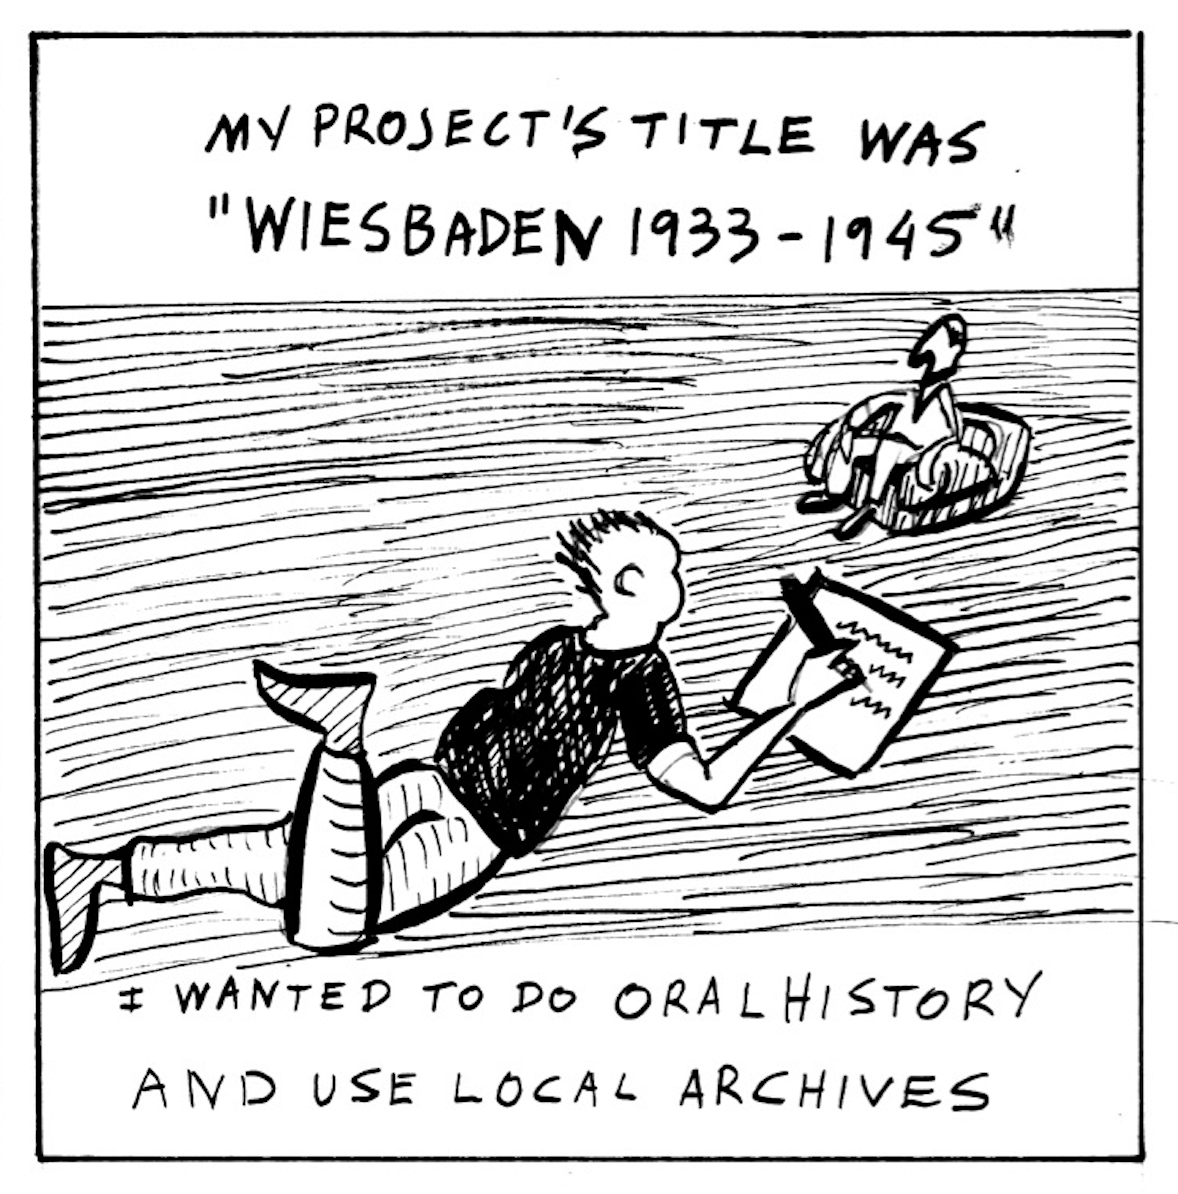 “My project’s title was ‘Wiesbaden 1933-1945.” I wanted to do oral history and use local archives.”